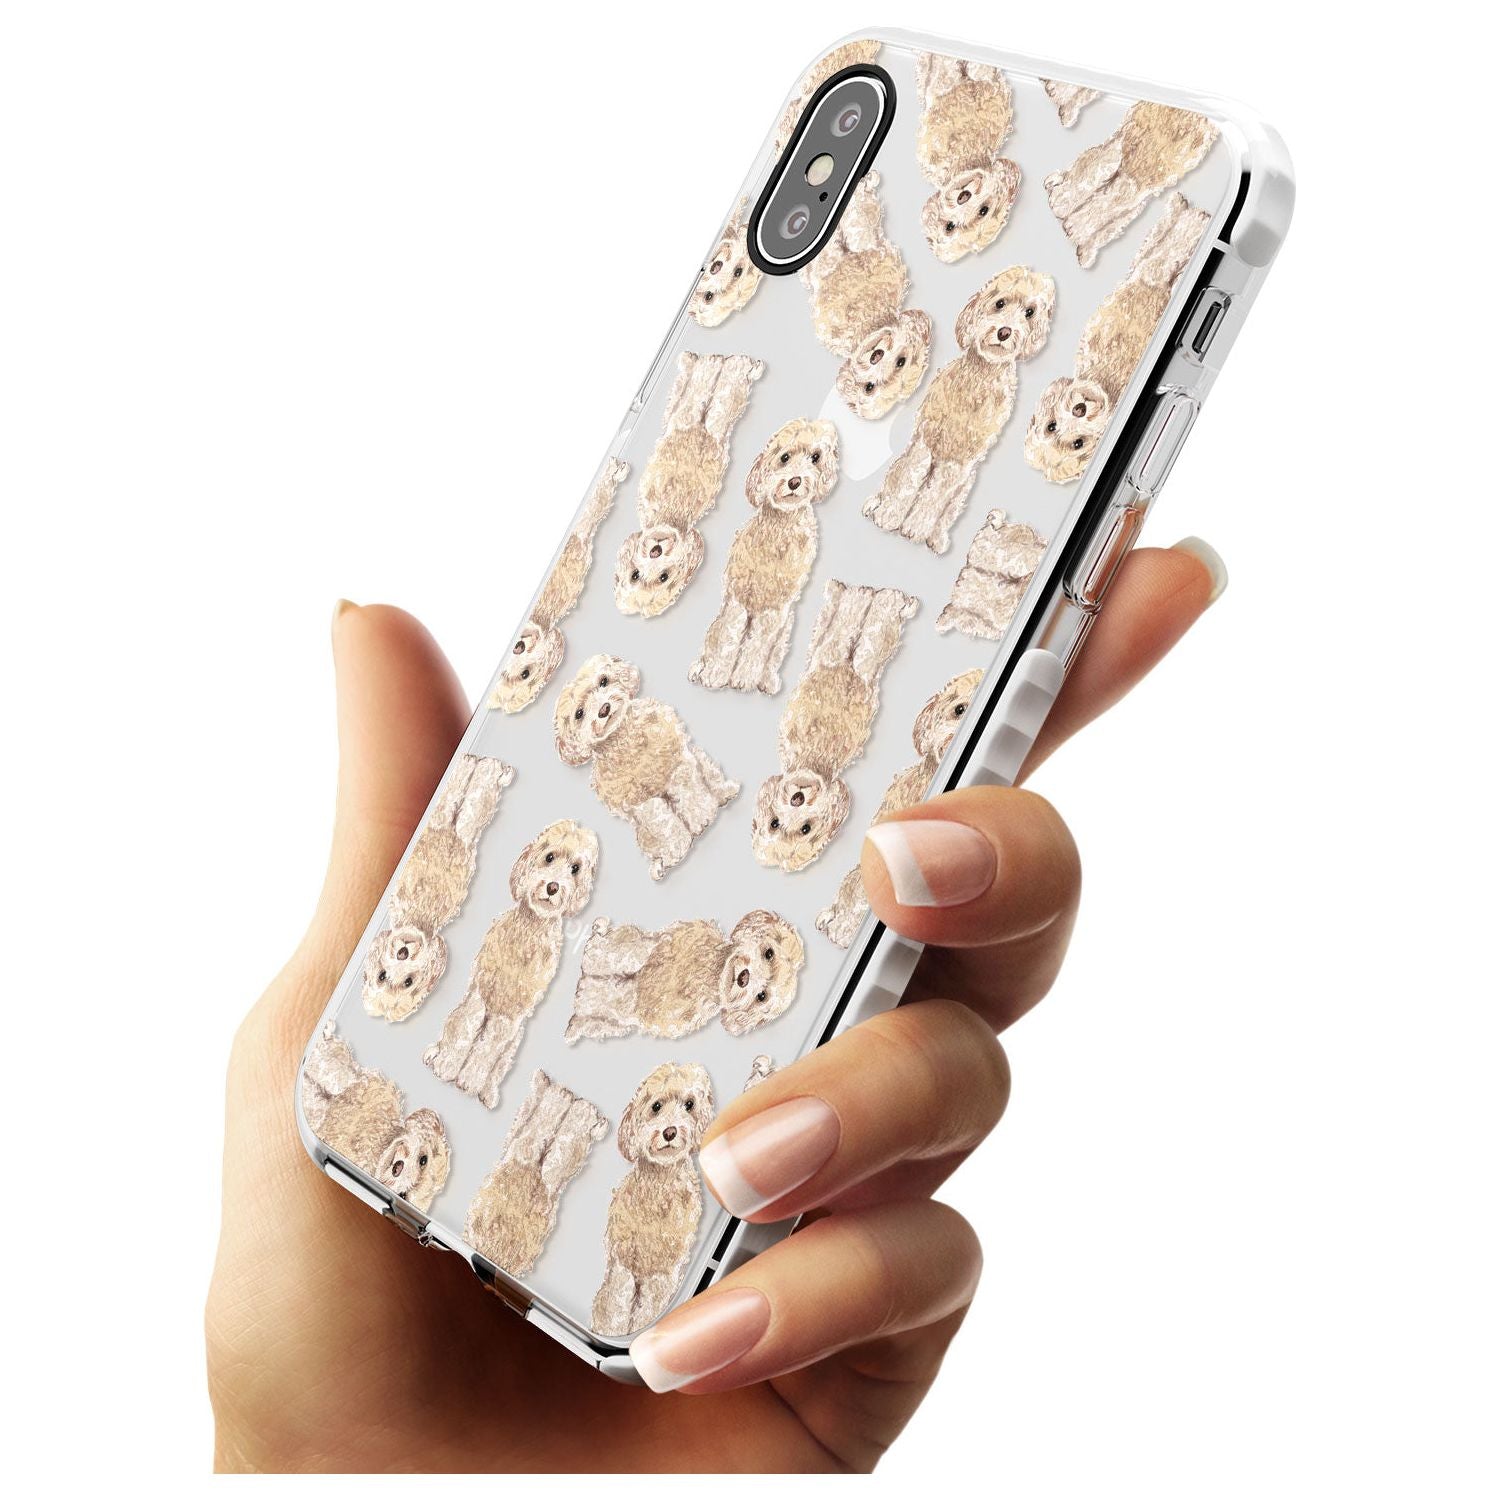 Cockapoo (Champagne) Watercolour Dog Pattern Impact Phone Case for iPhone X XS Max XR